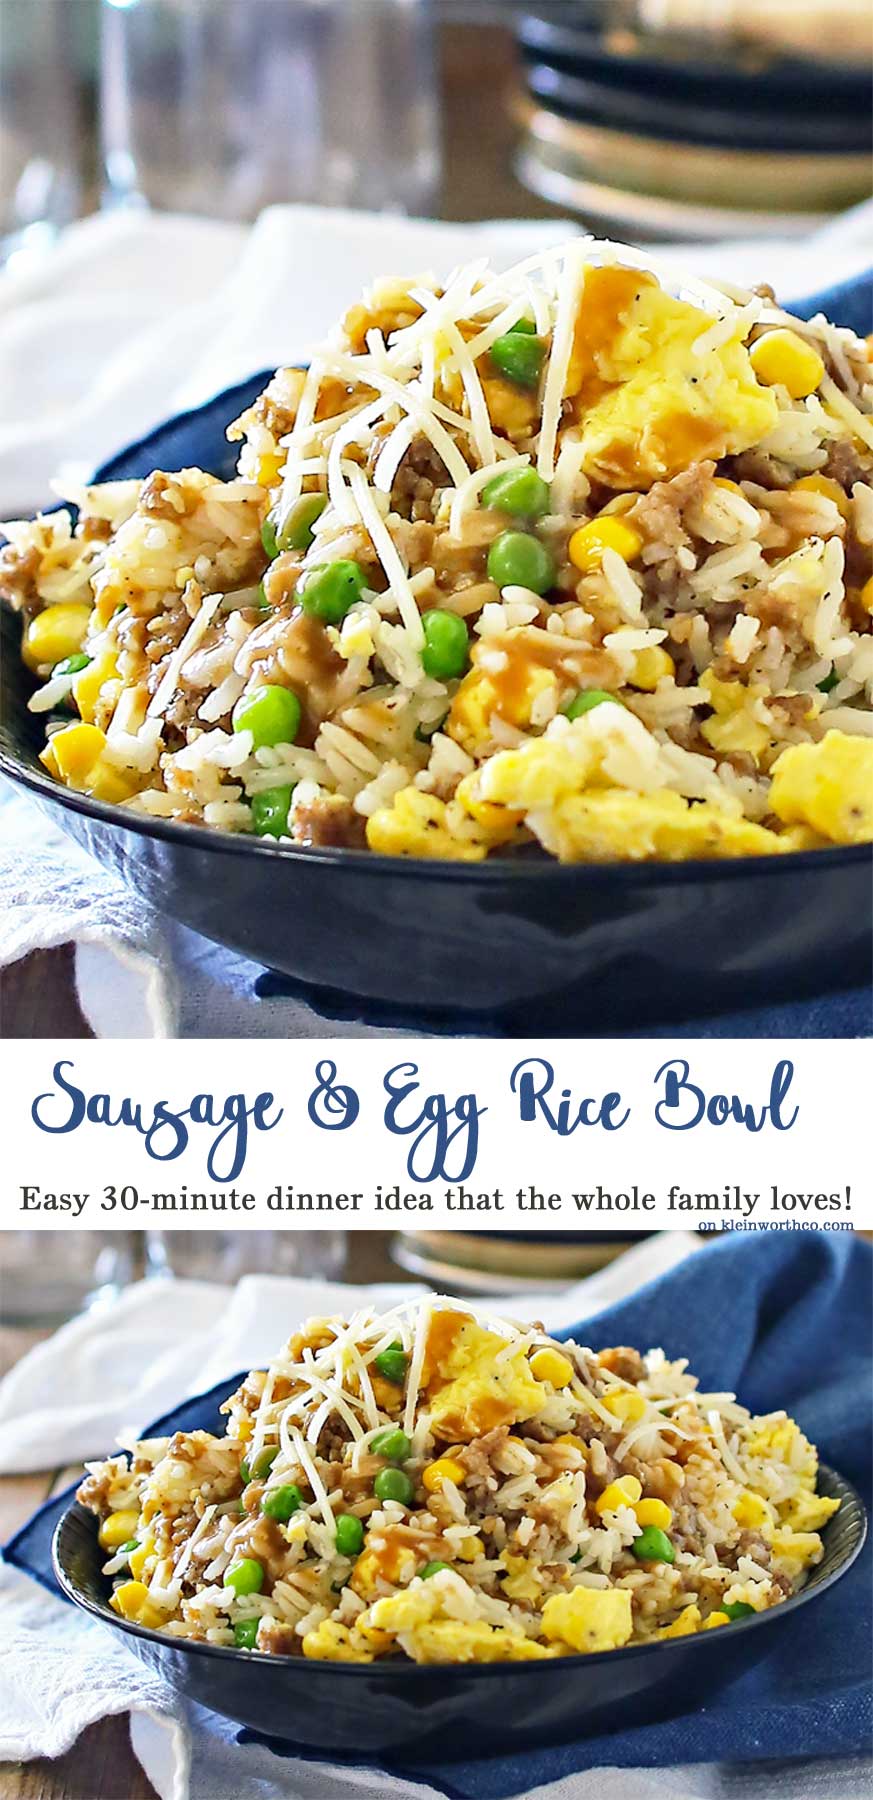 Sausage Veggie Rice Bowls Recipe - Fast and Flavorful!